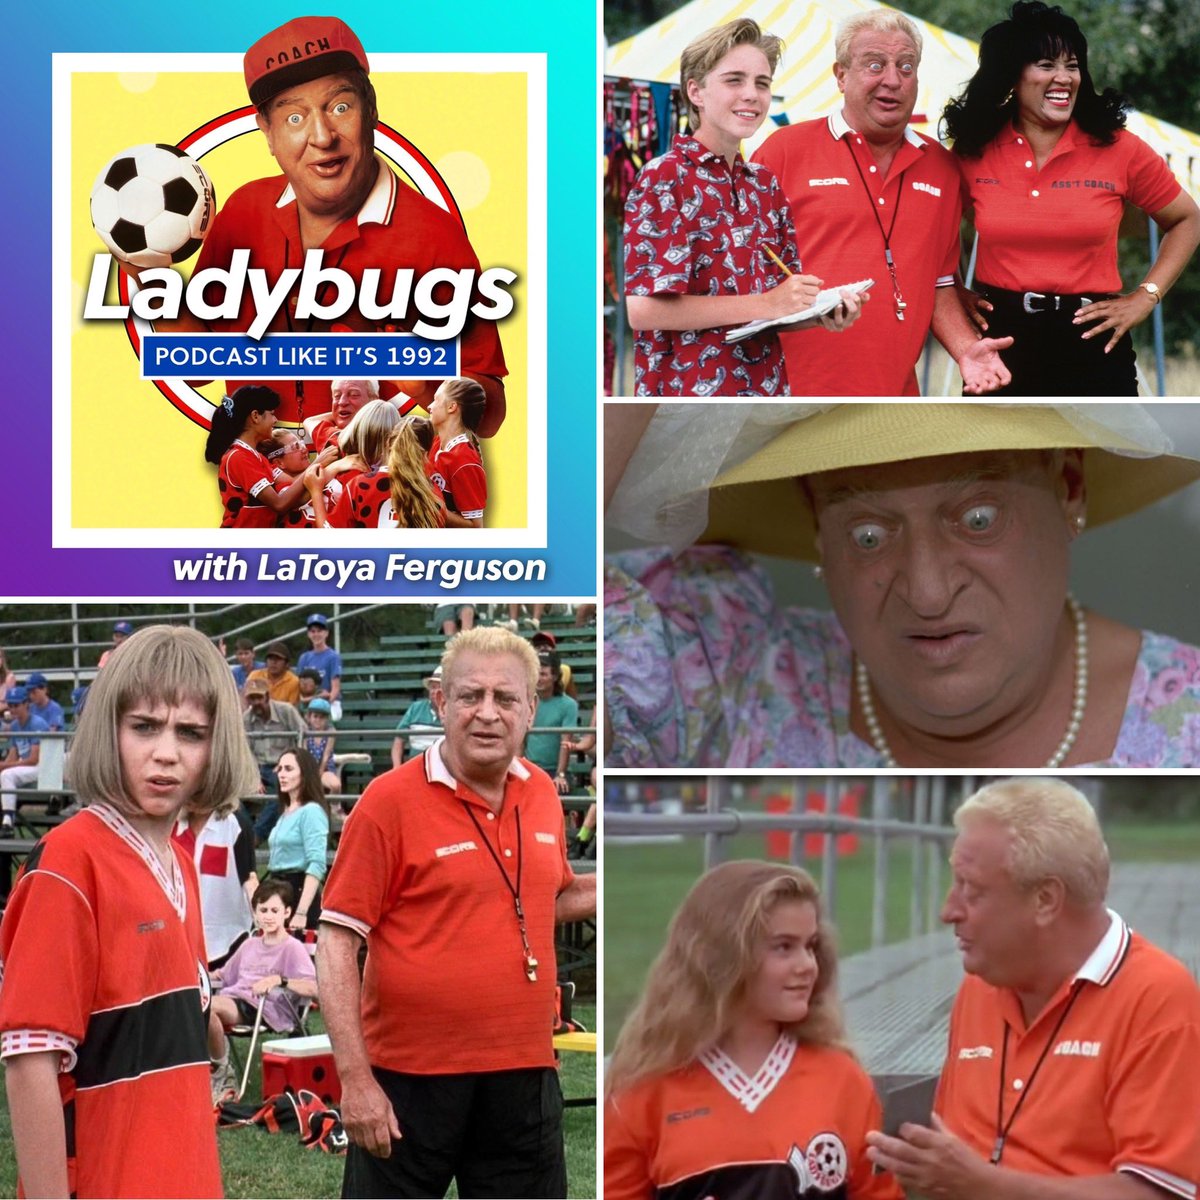 This week on @podcastlikeits 1992 @emilystjams and I unpacked Ladybugs with @lafergs We discuss all things Rodney Dangerfield, girls soccer and obviously rebooting Rover Dangerfield. ⚽️🥅